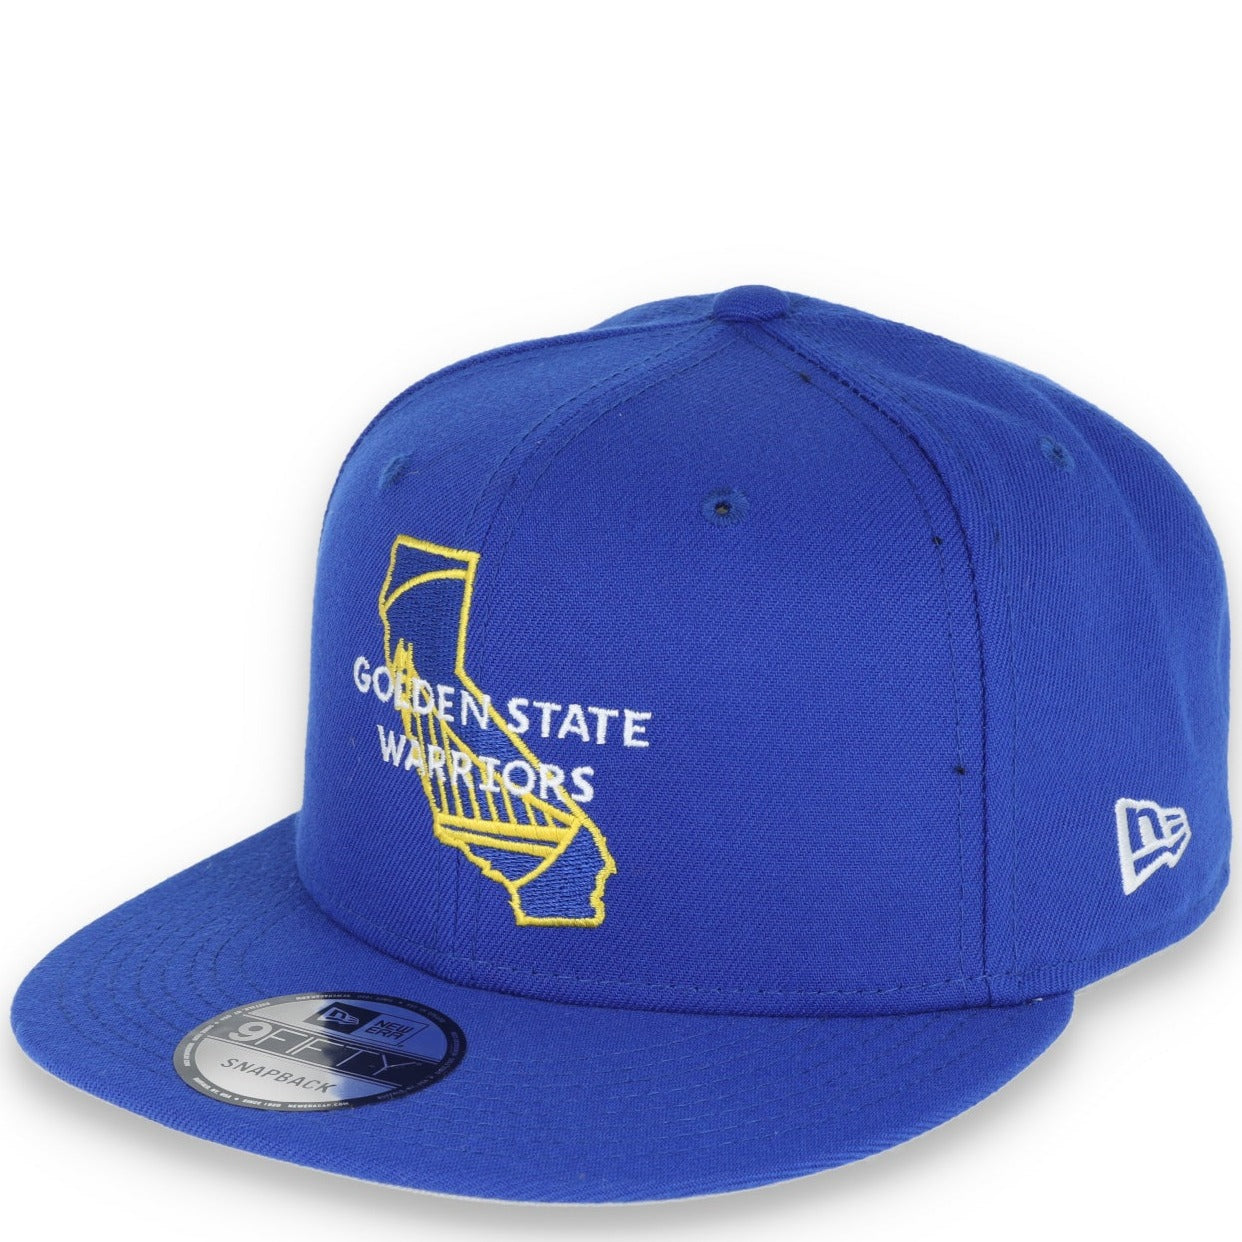 Golden State Warriors New Era Local C1 9FIFTY Snapback Hat